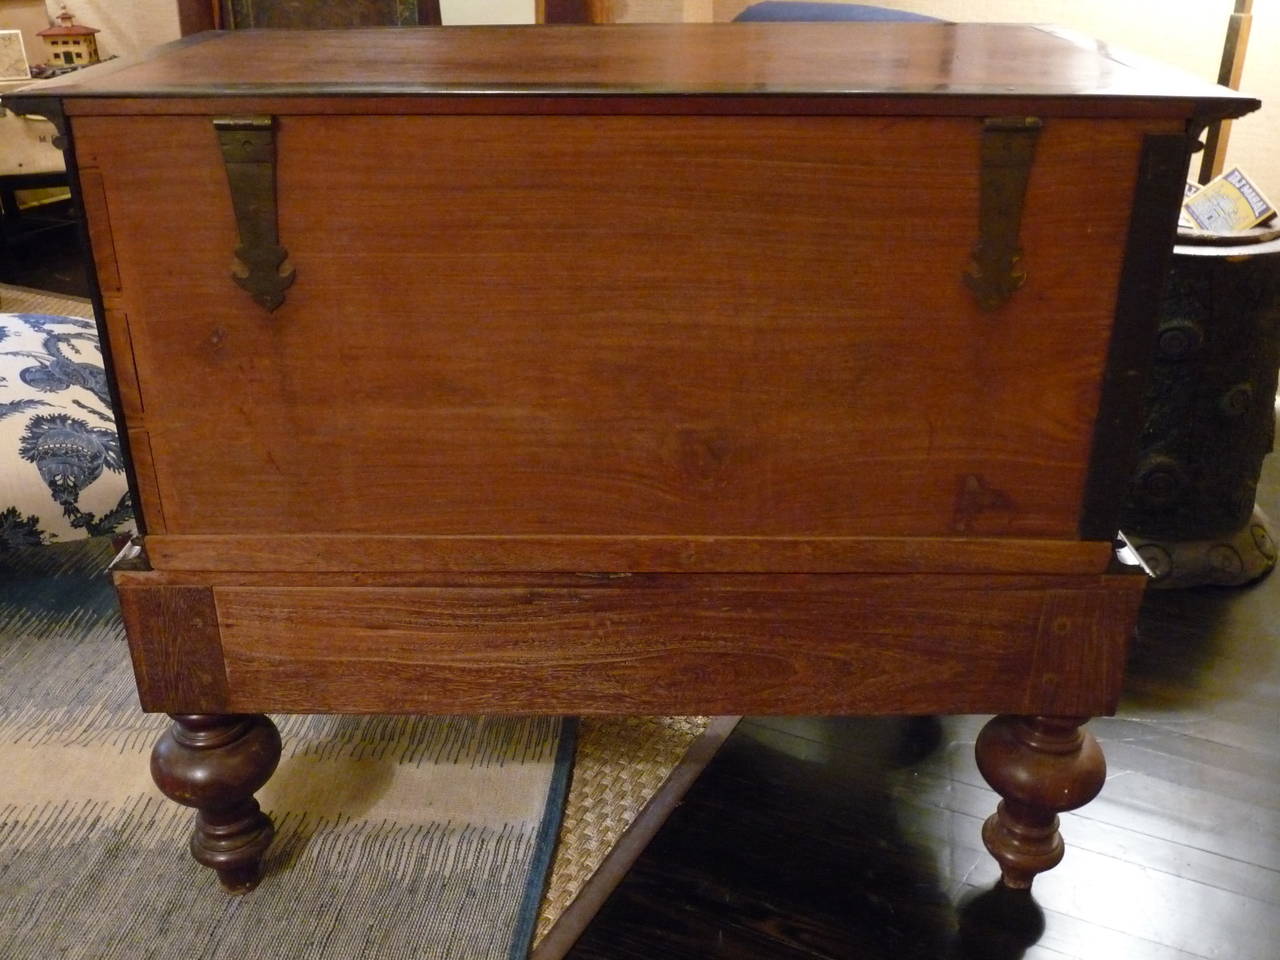 A great British colonial chest made of teak and ebony with solid brass trim. The top section offers ample storage and, sits on two drawers and has substantial turned legs.